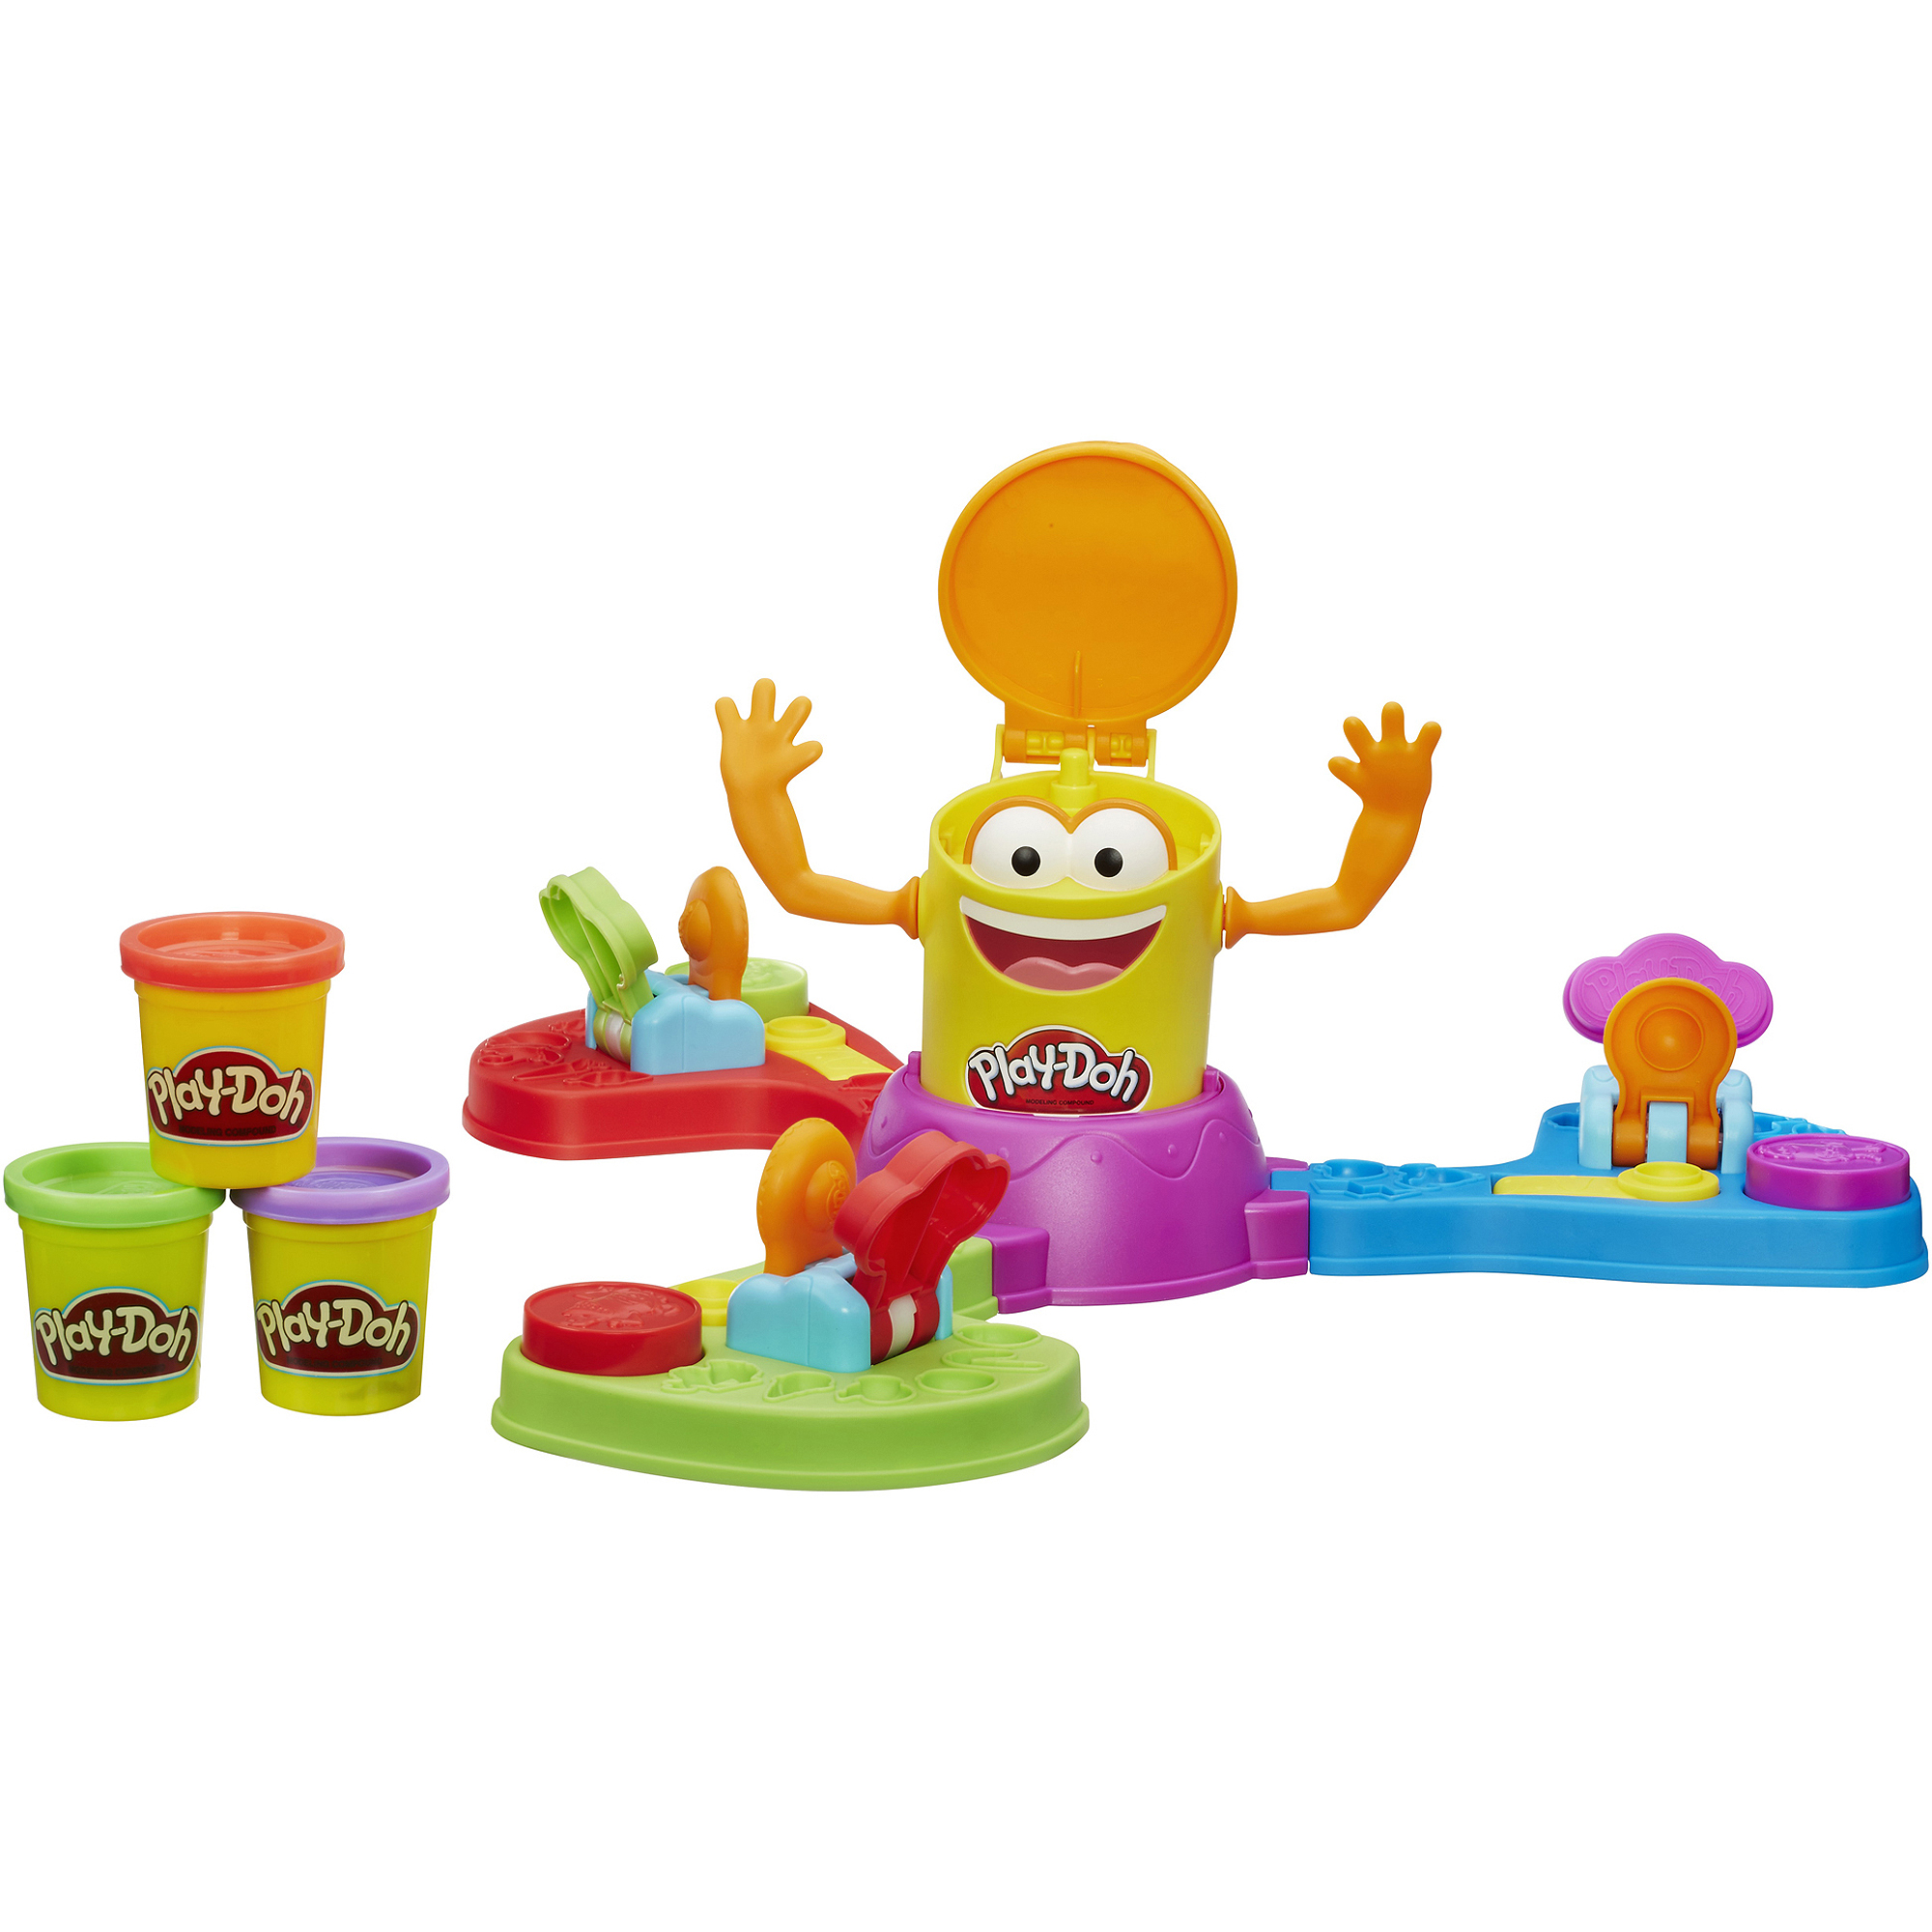 Play-Doh Launch Game with 3 Cans of Play-Doh - image 2 of 2